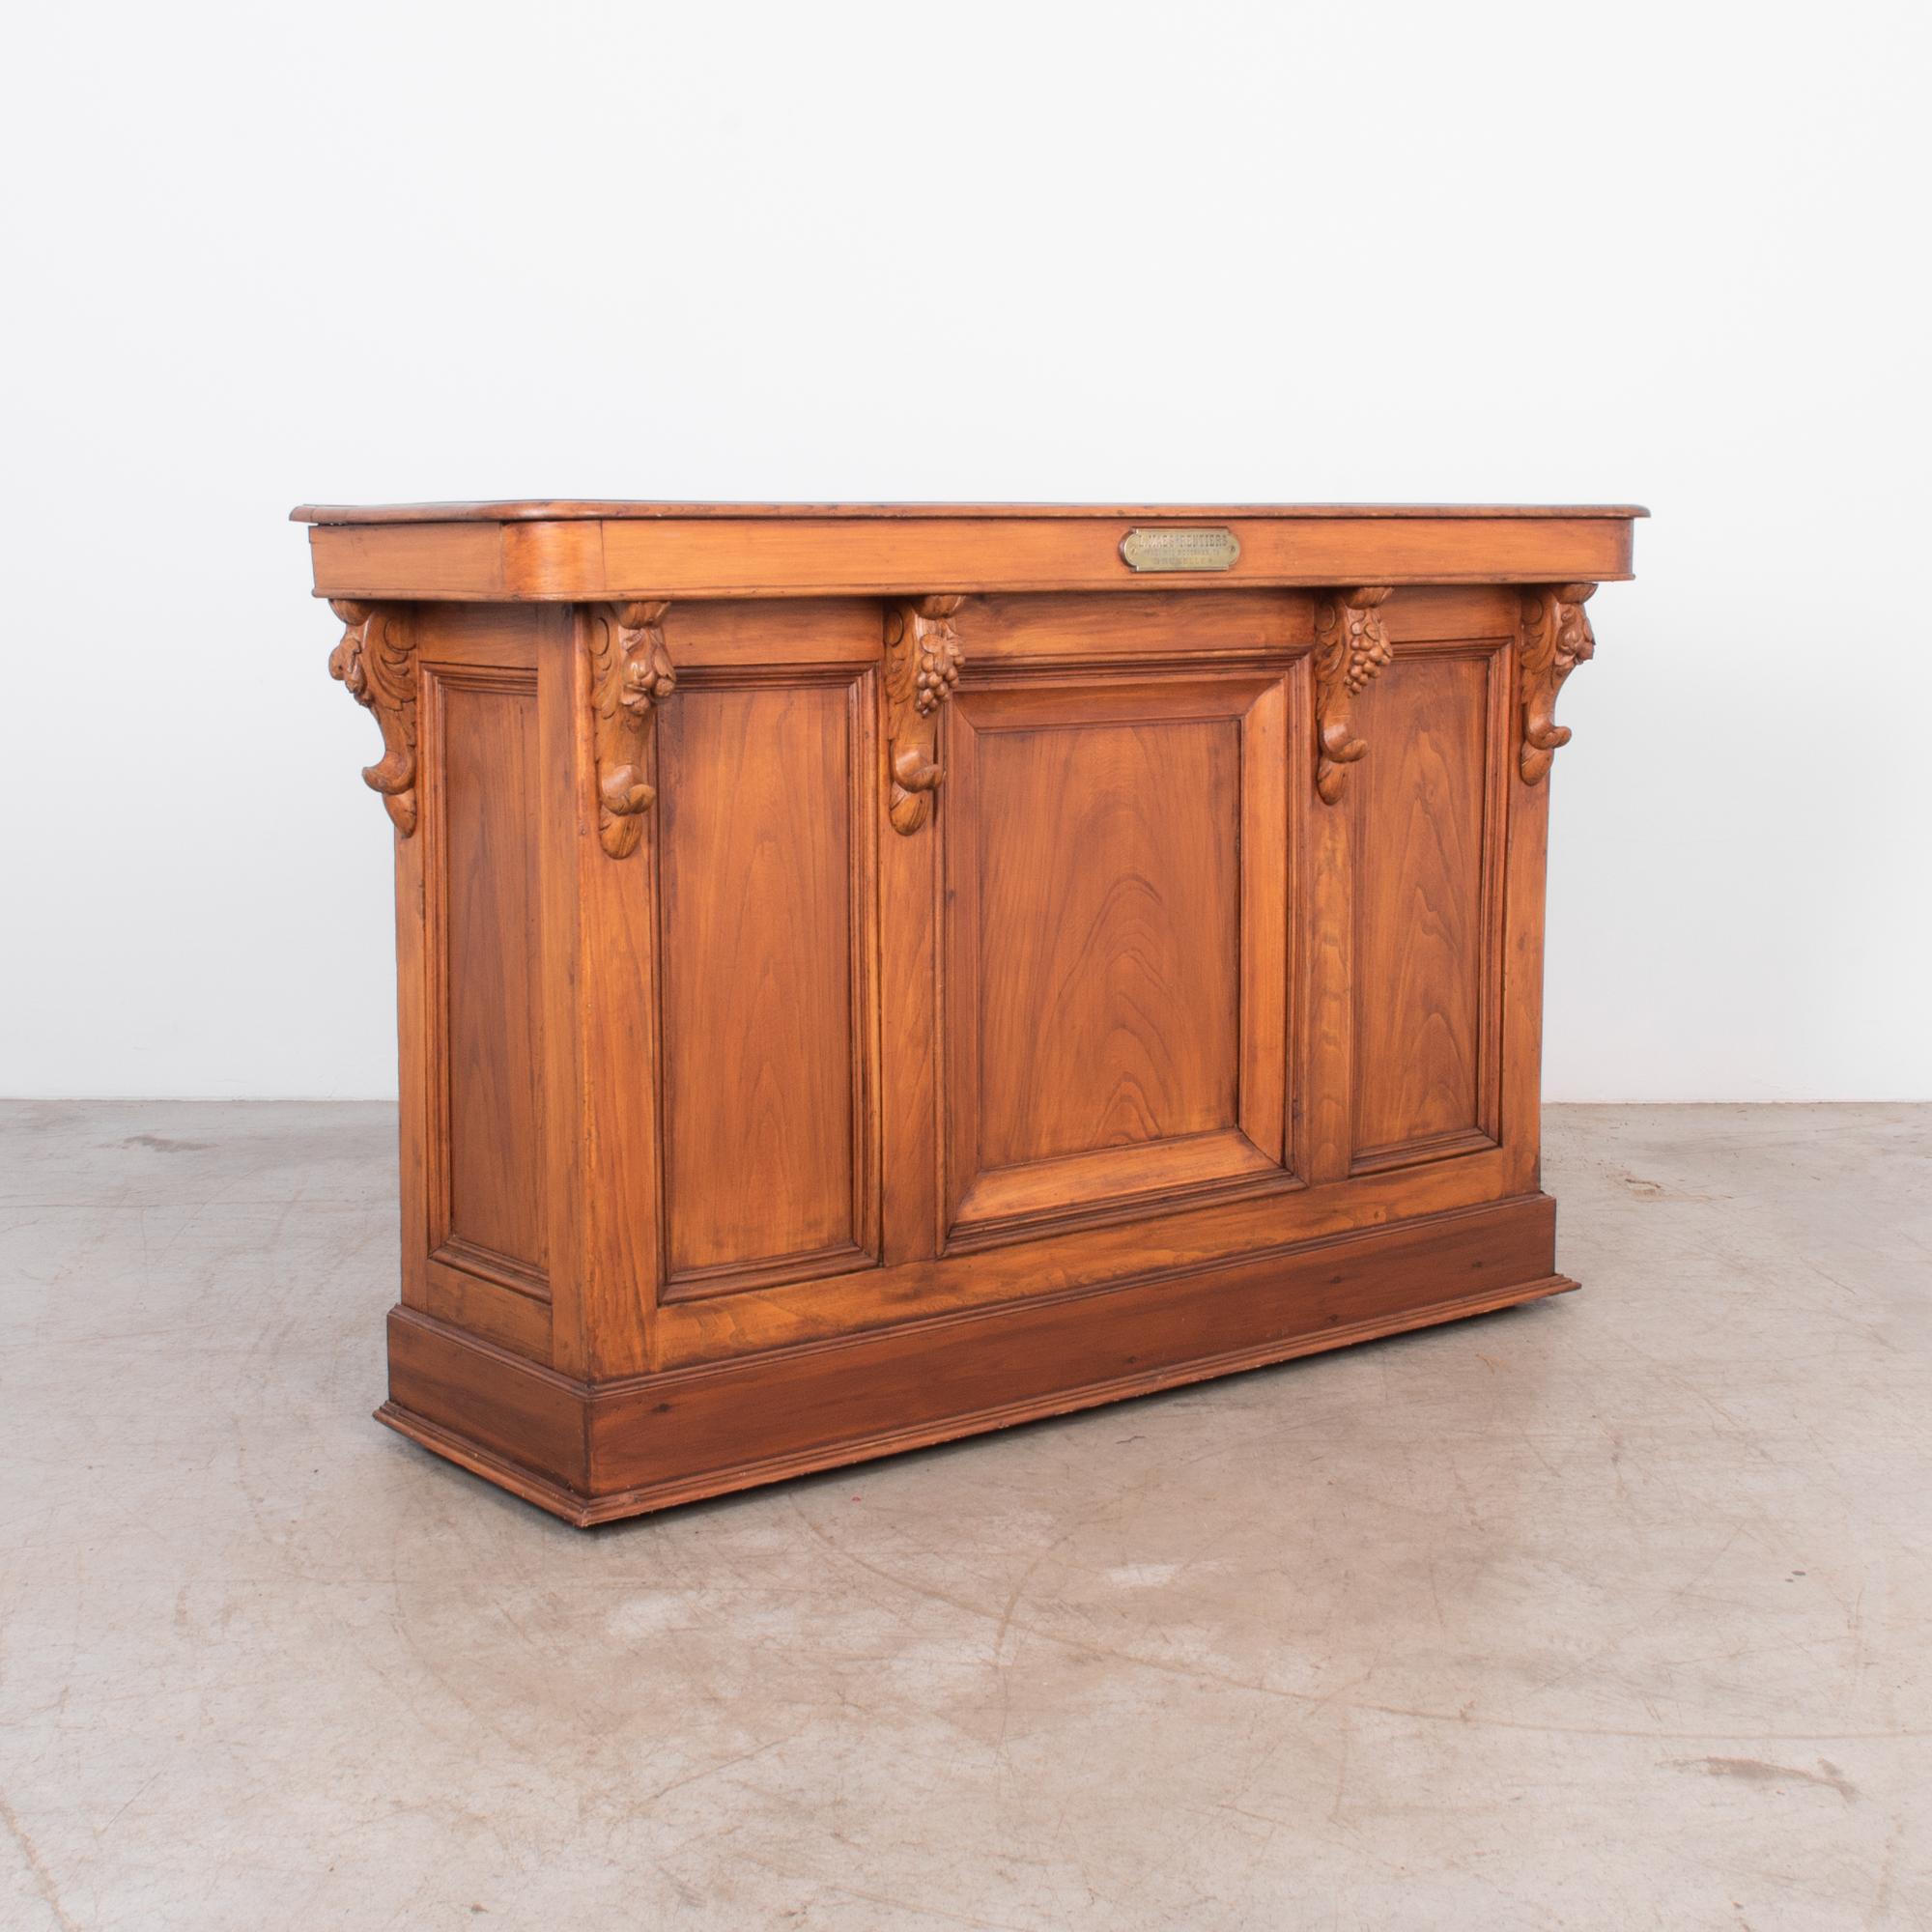 This Belgian style shop counter was built from a cafe in Brussels, circa 1900. Rounded profile and counter shape is carved from a well toned European Ash, great carved fruit motif suggest the original location of this counter. The back has been